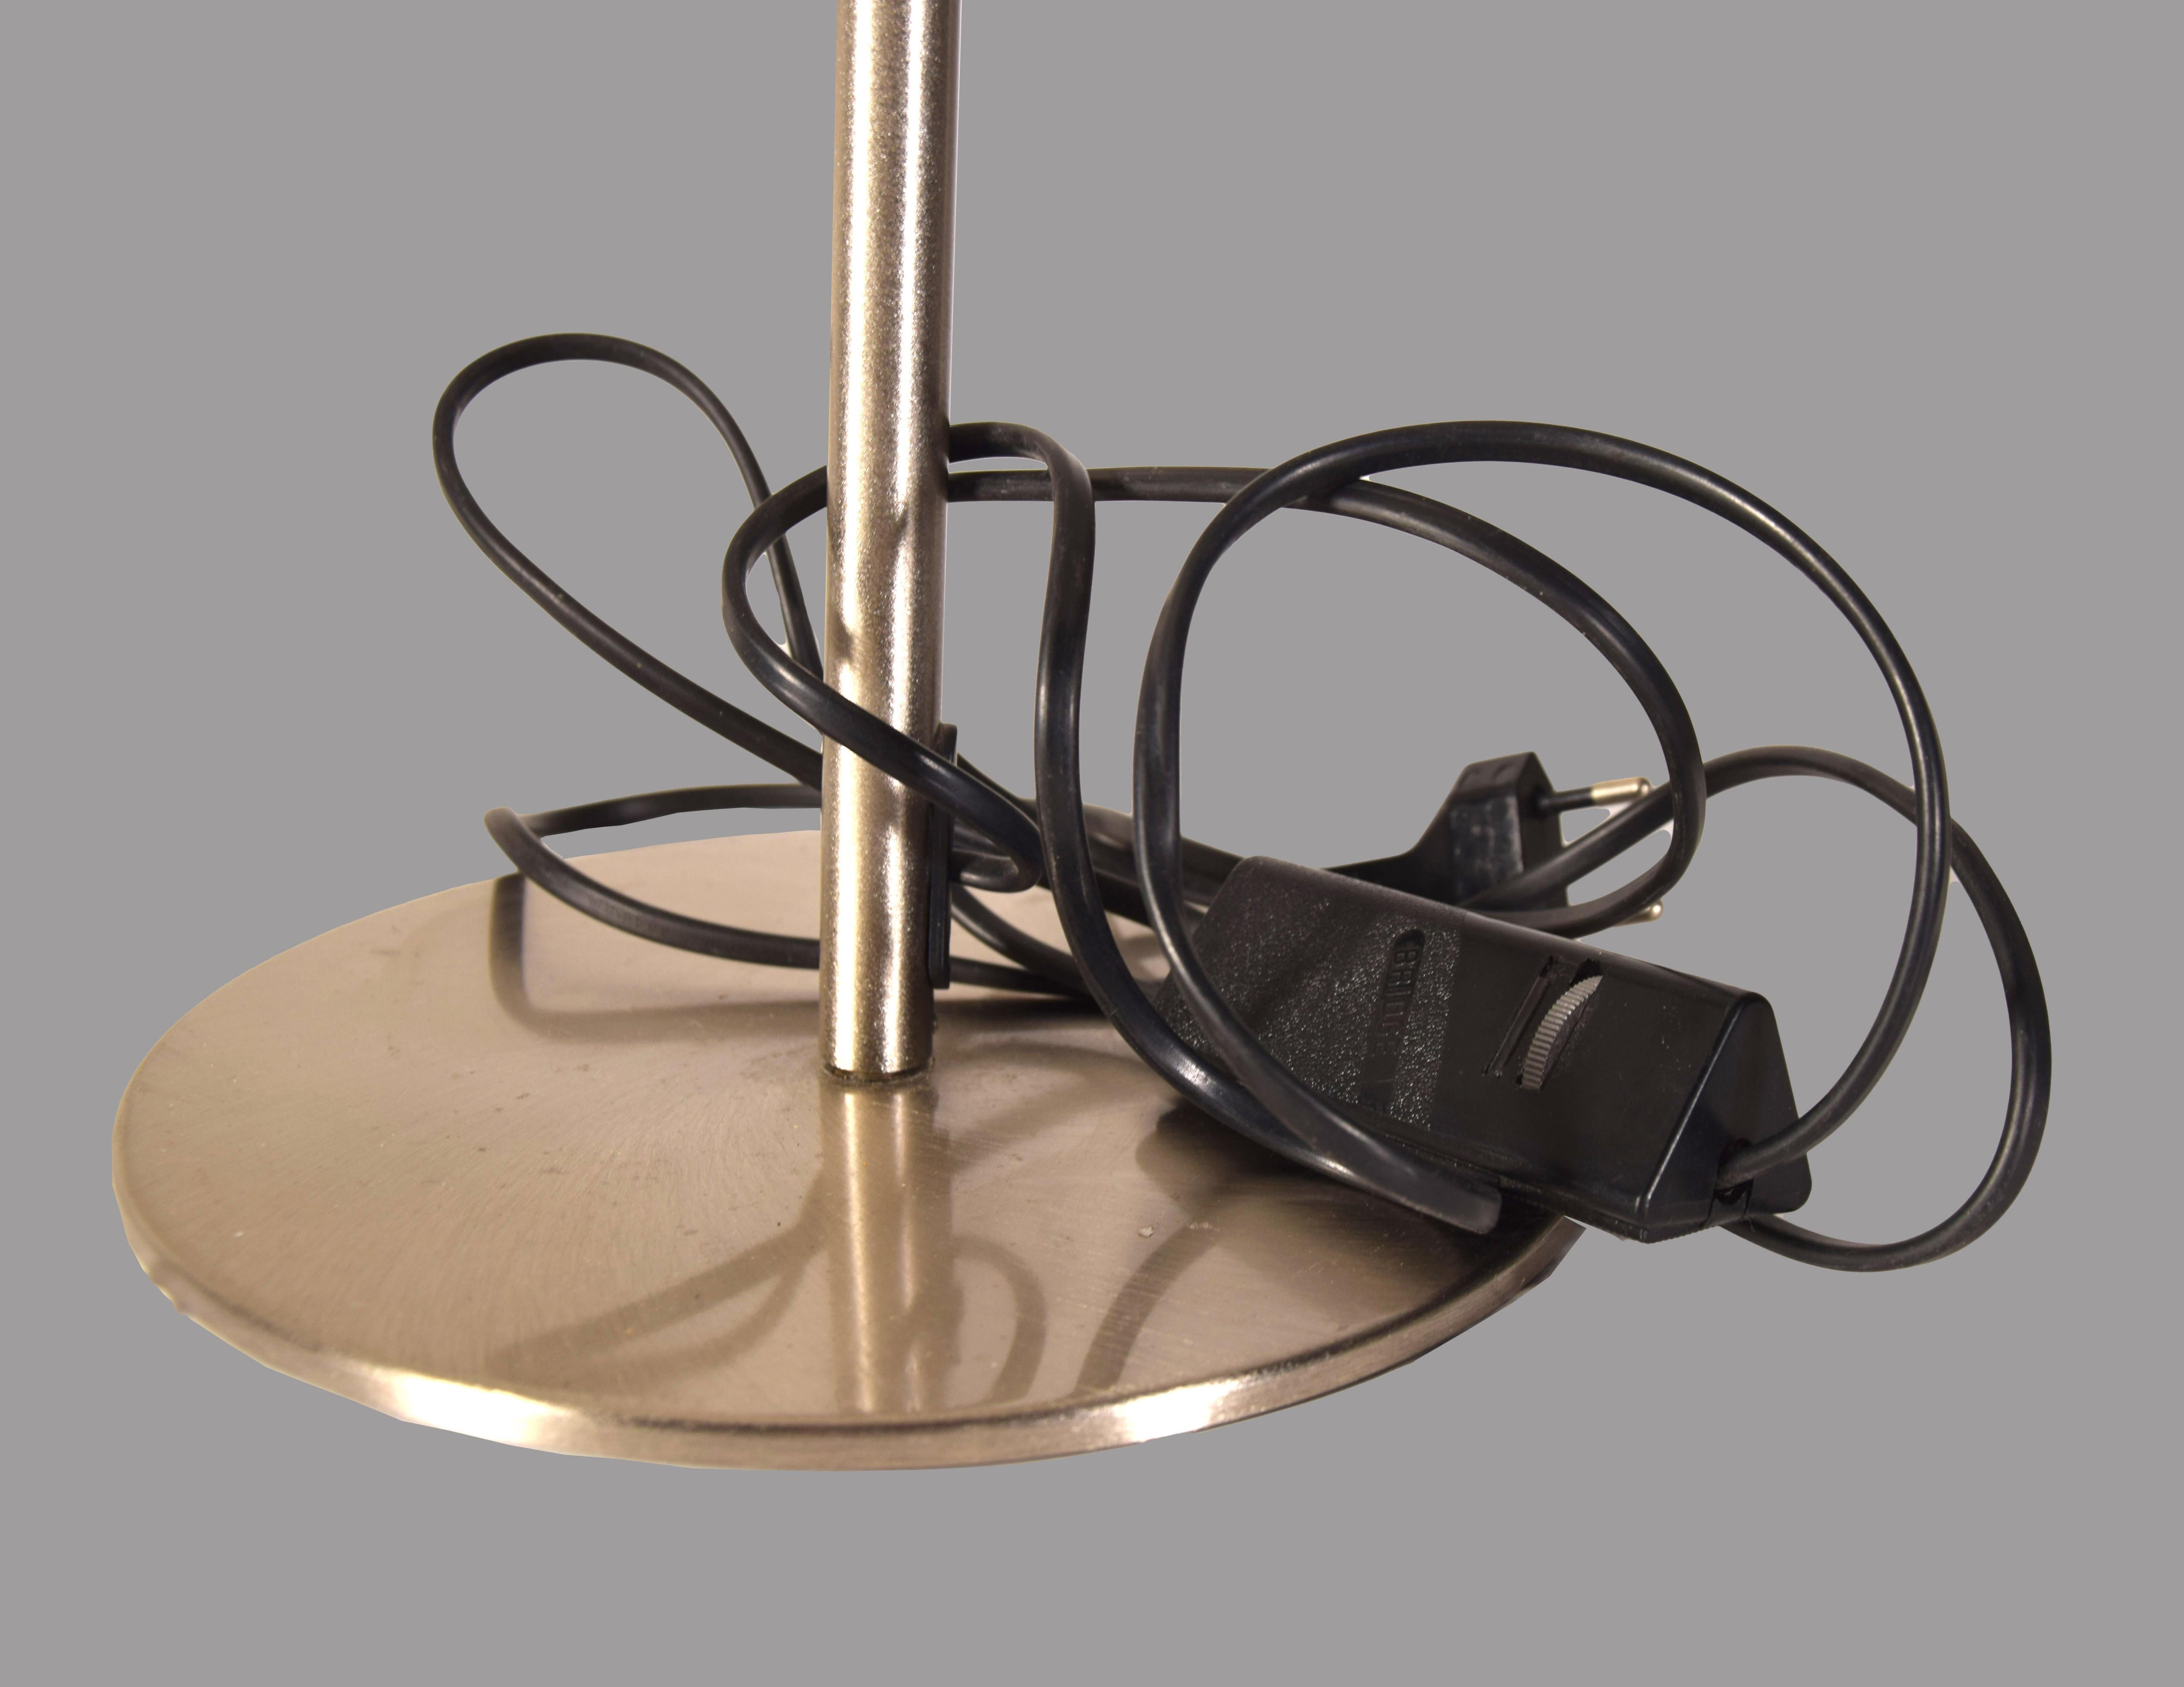 Leucos table lamp is a fashionable lamp realized in the 1980s by Leucos.

Circular handmade table lamp made of chromed metal and glass. 

Original label of the company.

Dimensions: cm 21 x 45 x 21. 

In very good condition.